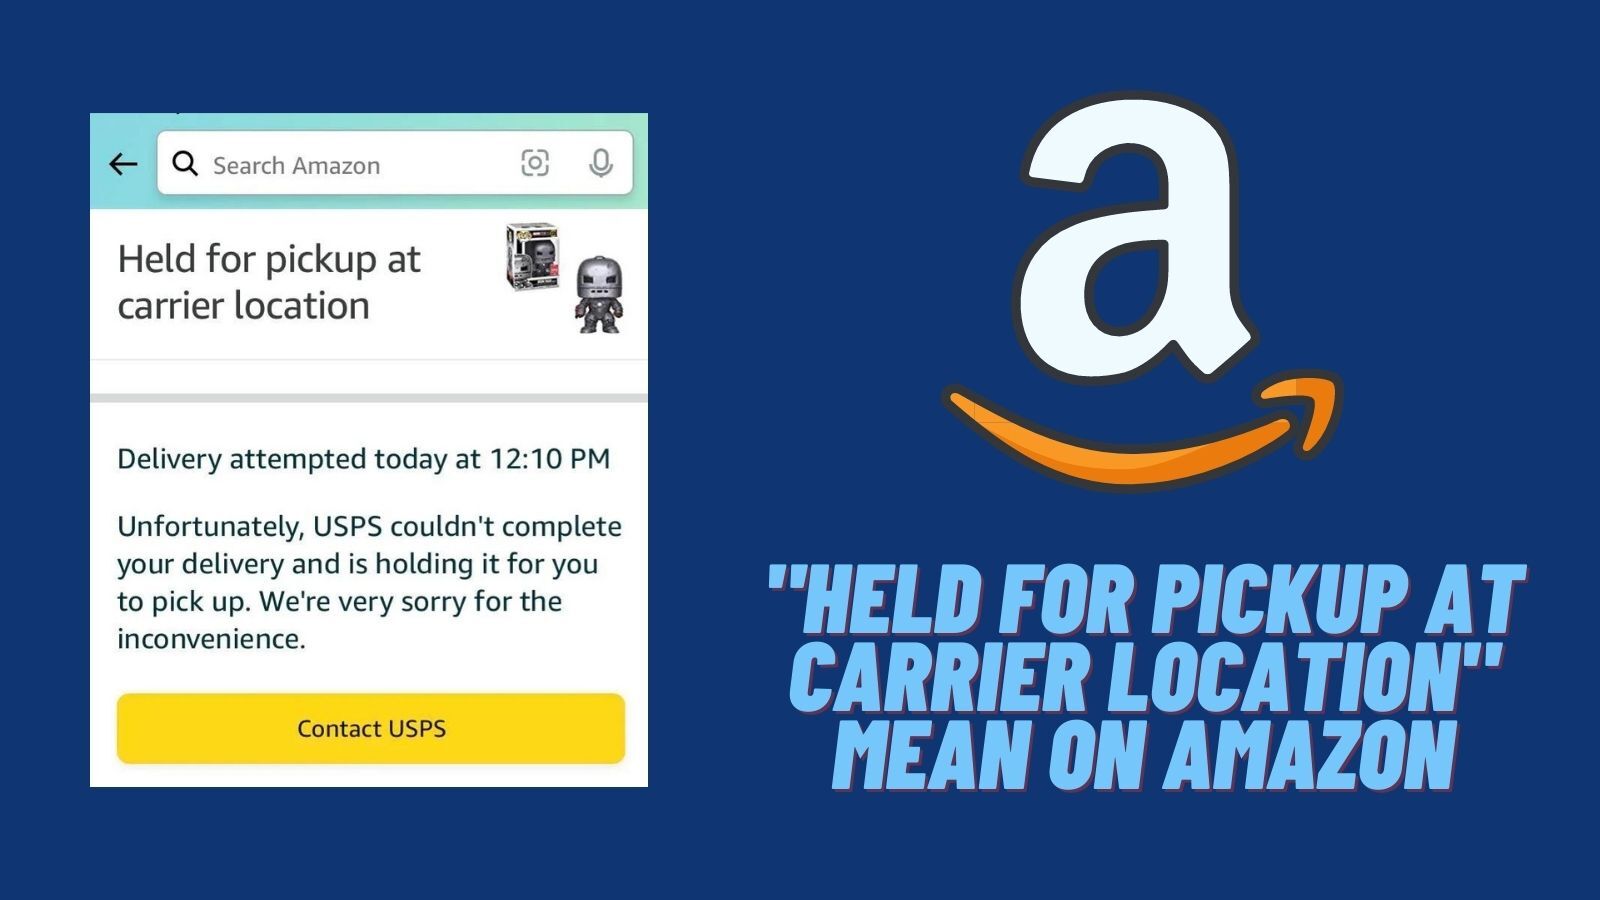 What Does "Held for Pickup at Carrier Location" Mean on Amazon?